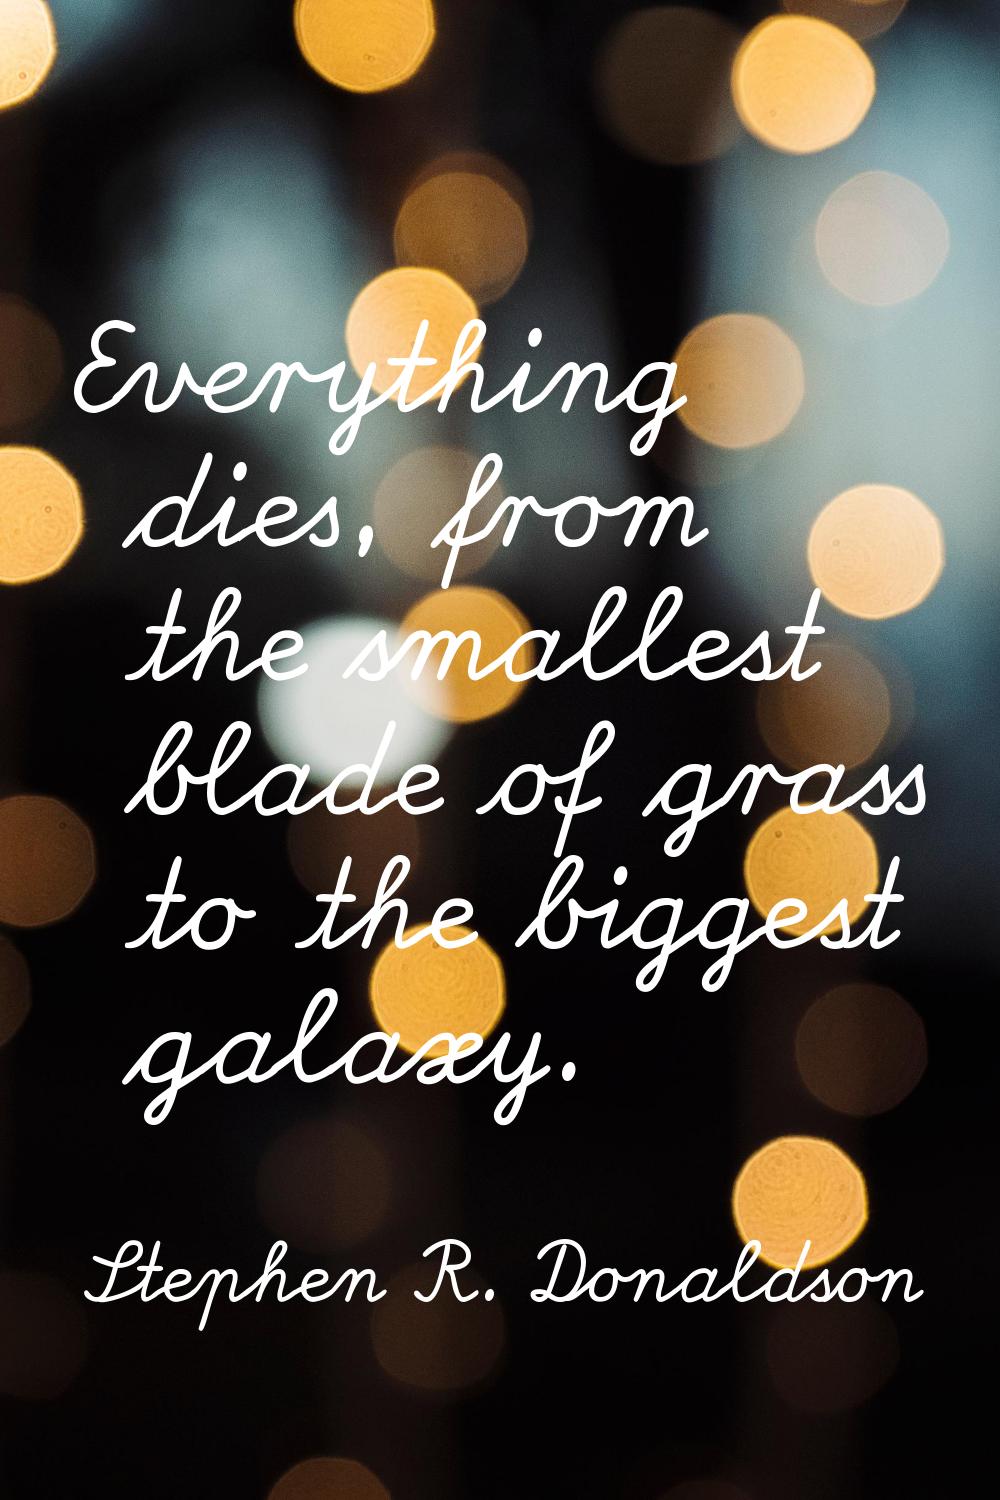 Everything dies, from the smallest blade of grass to the biggest galaxy.